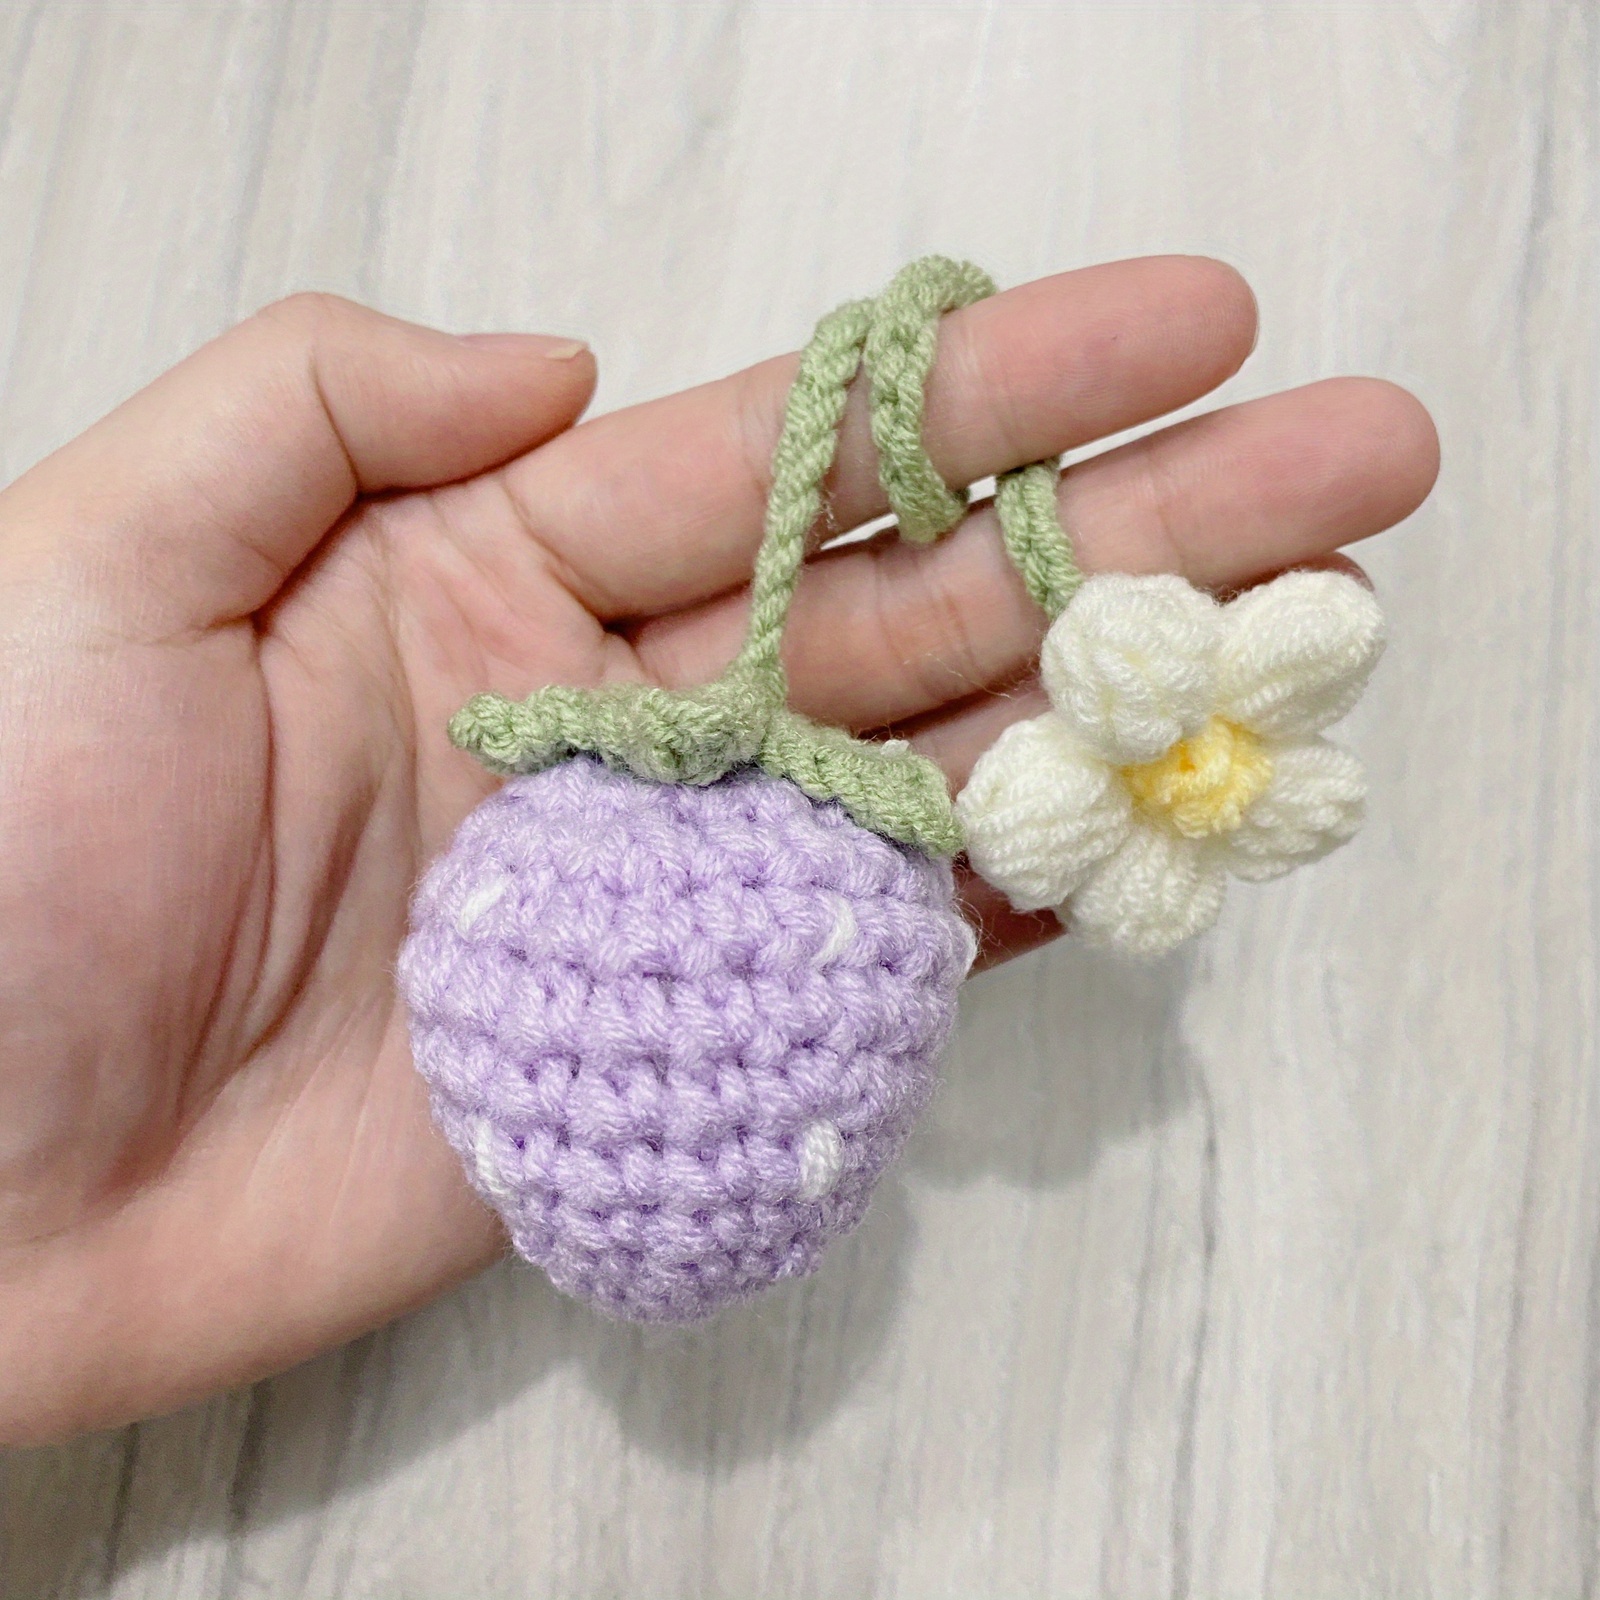 BOOFIRE Keychain Handmade,Hand Knitted Strawberry Bag Ornament,Backpack Ornaments for Girls,gift for Her Kids Birthday Graduation (1pcs)